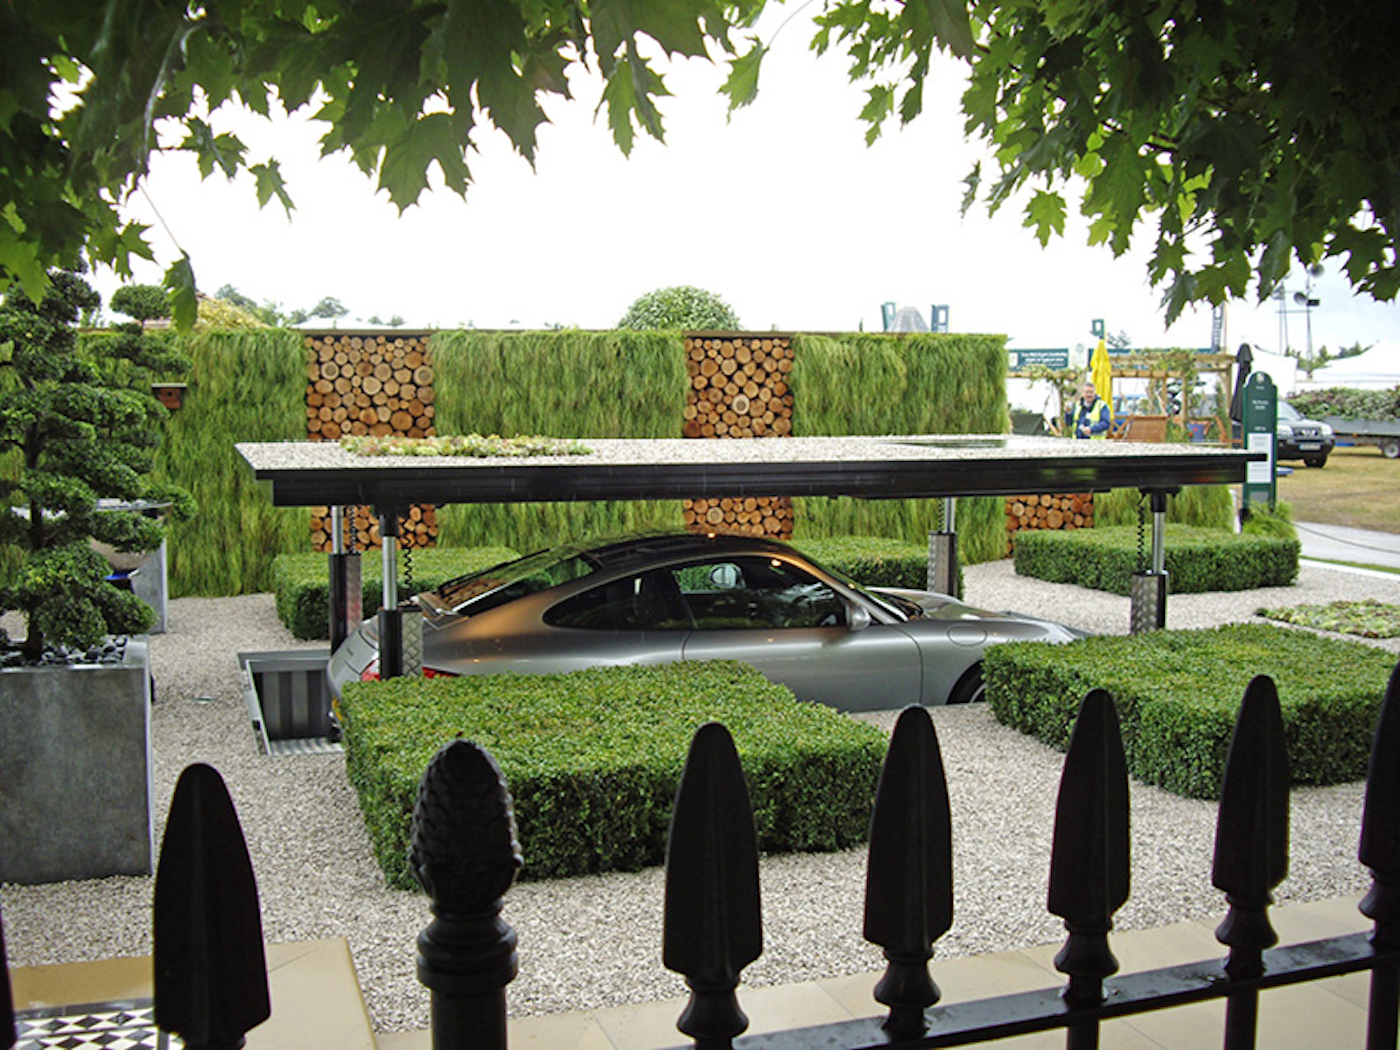 Car Coming out of Carport with Surrounding Greenery at Chelsea Flower Show 2008